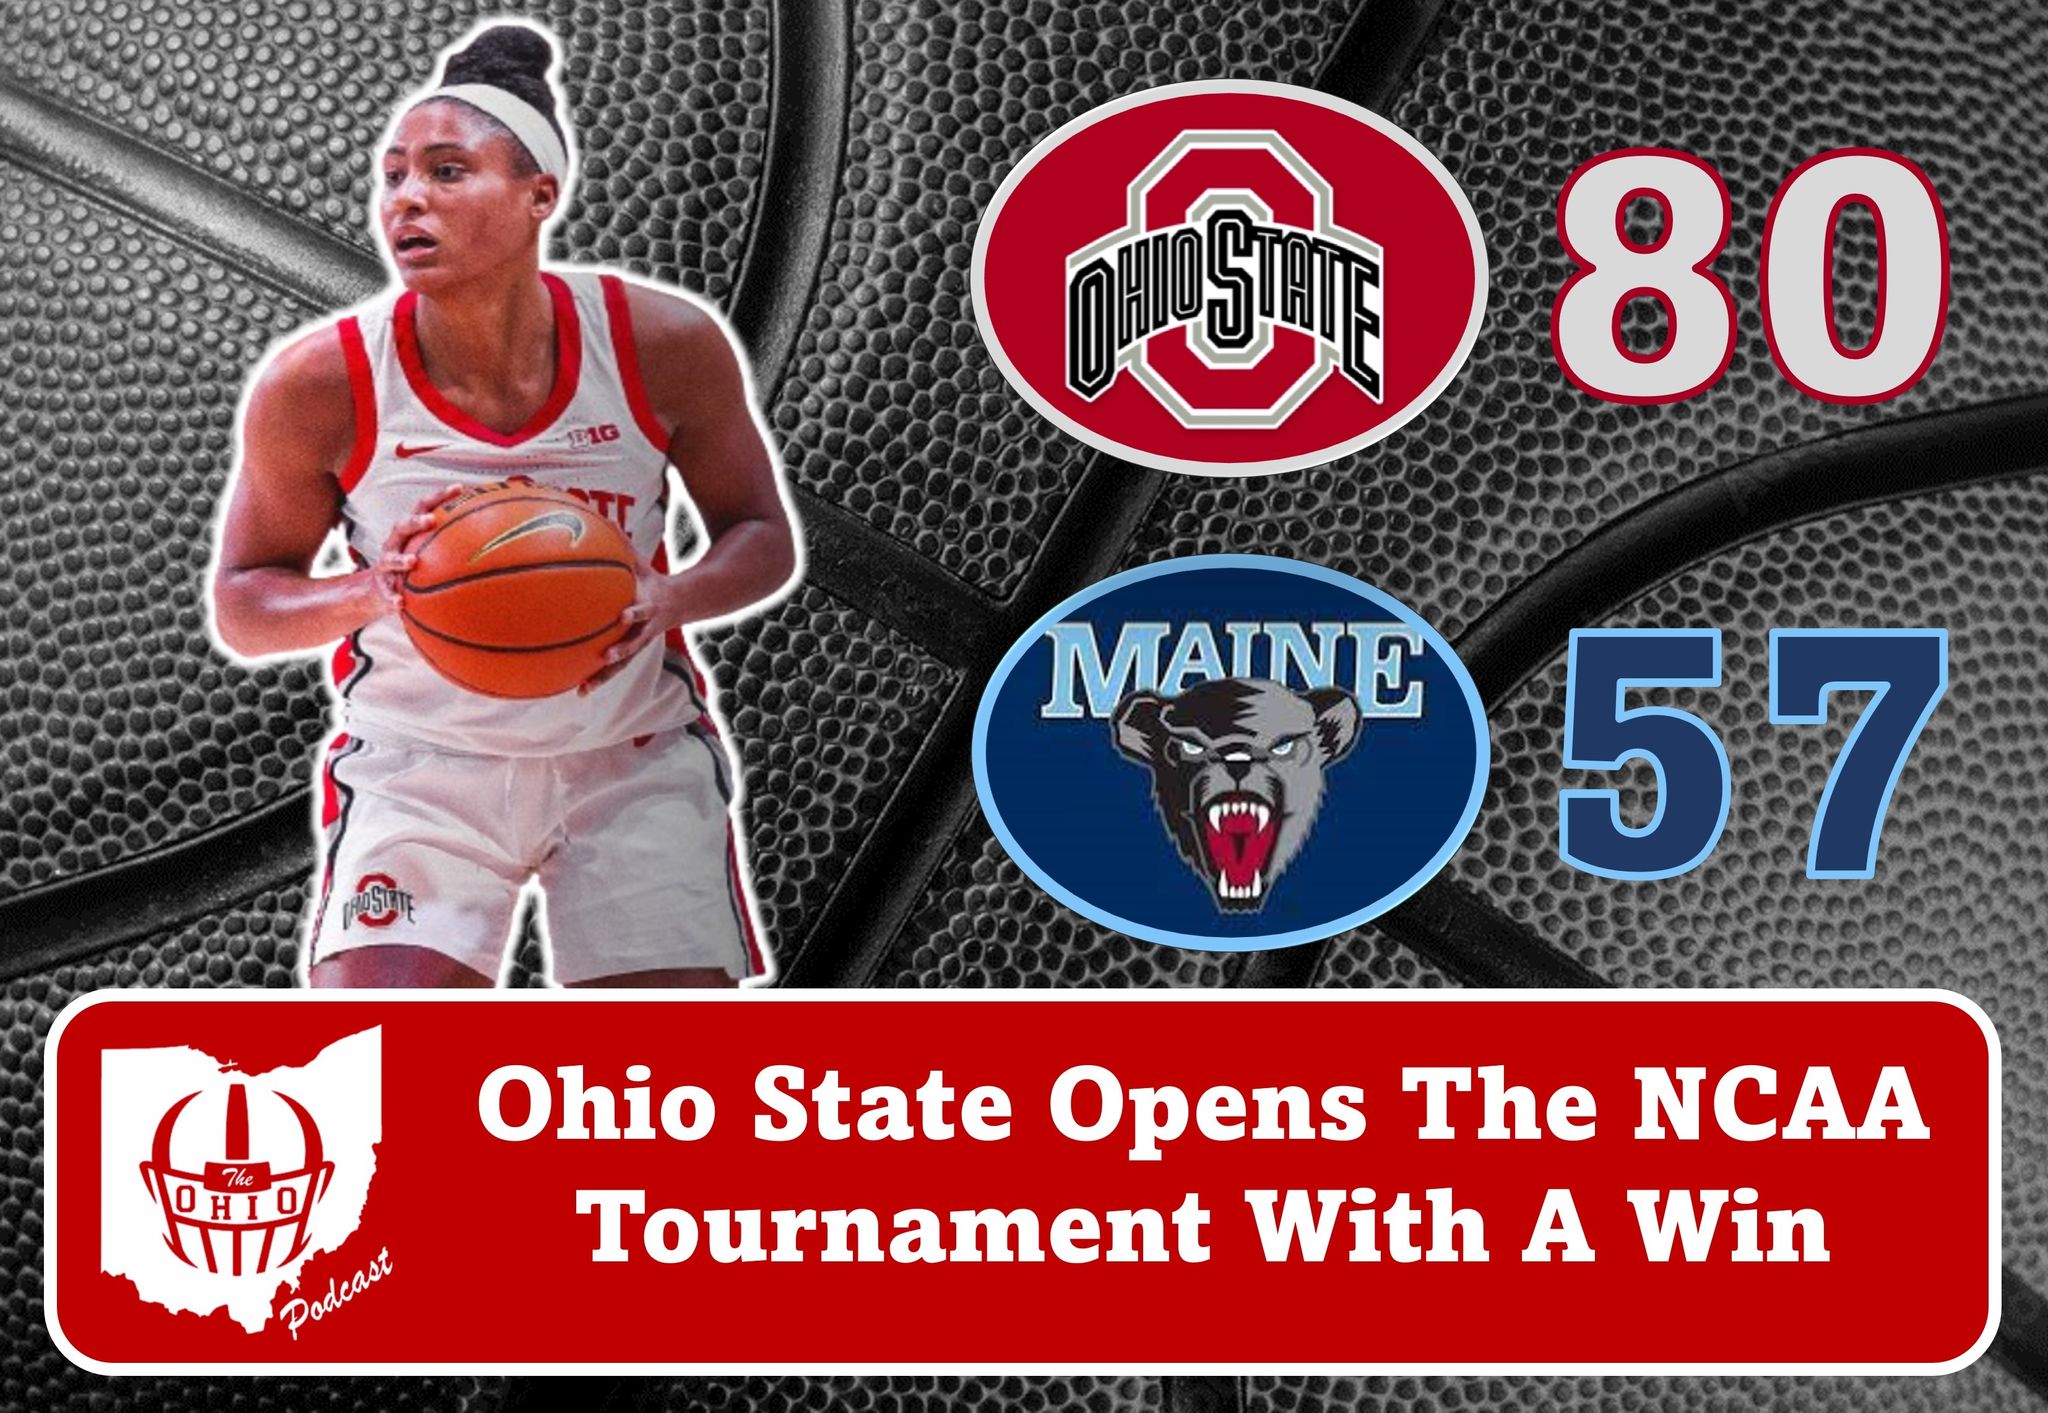 Ohio State Opens the NCAA Tournament with a Win